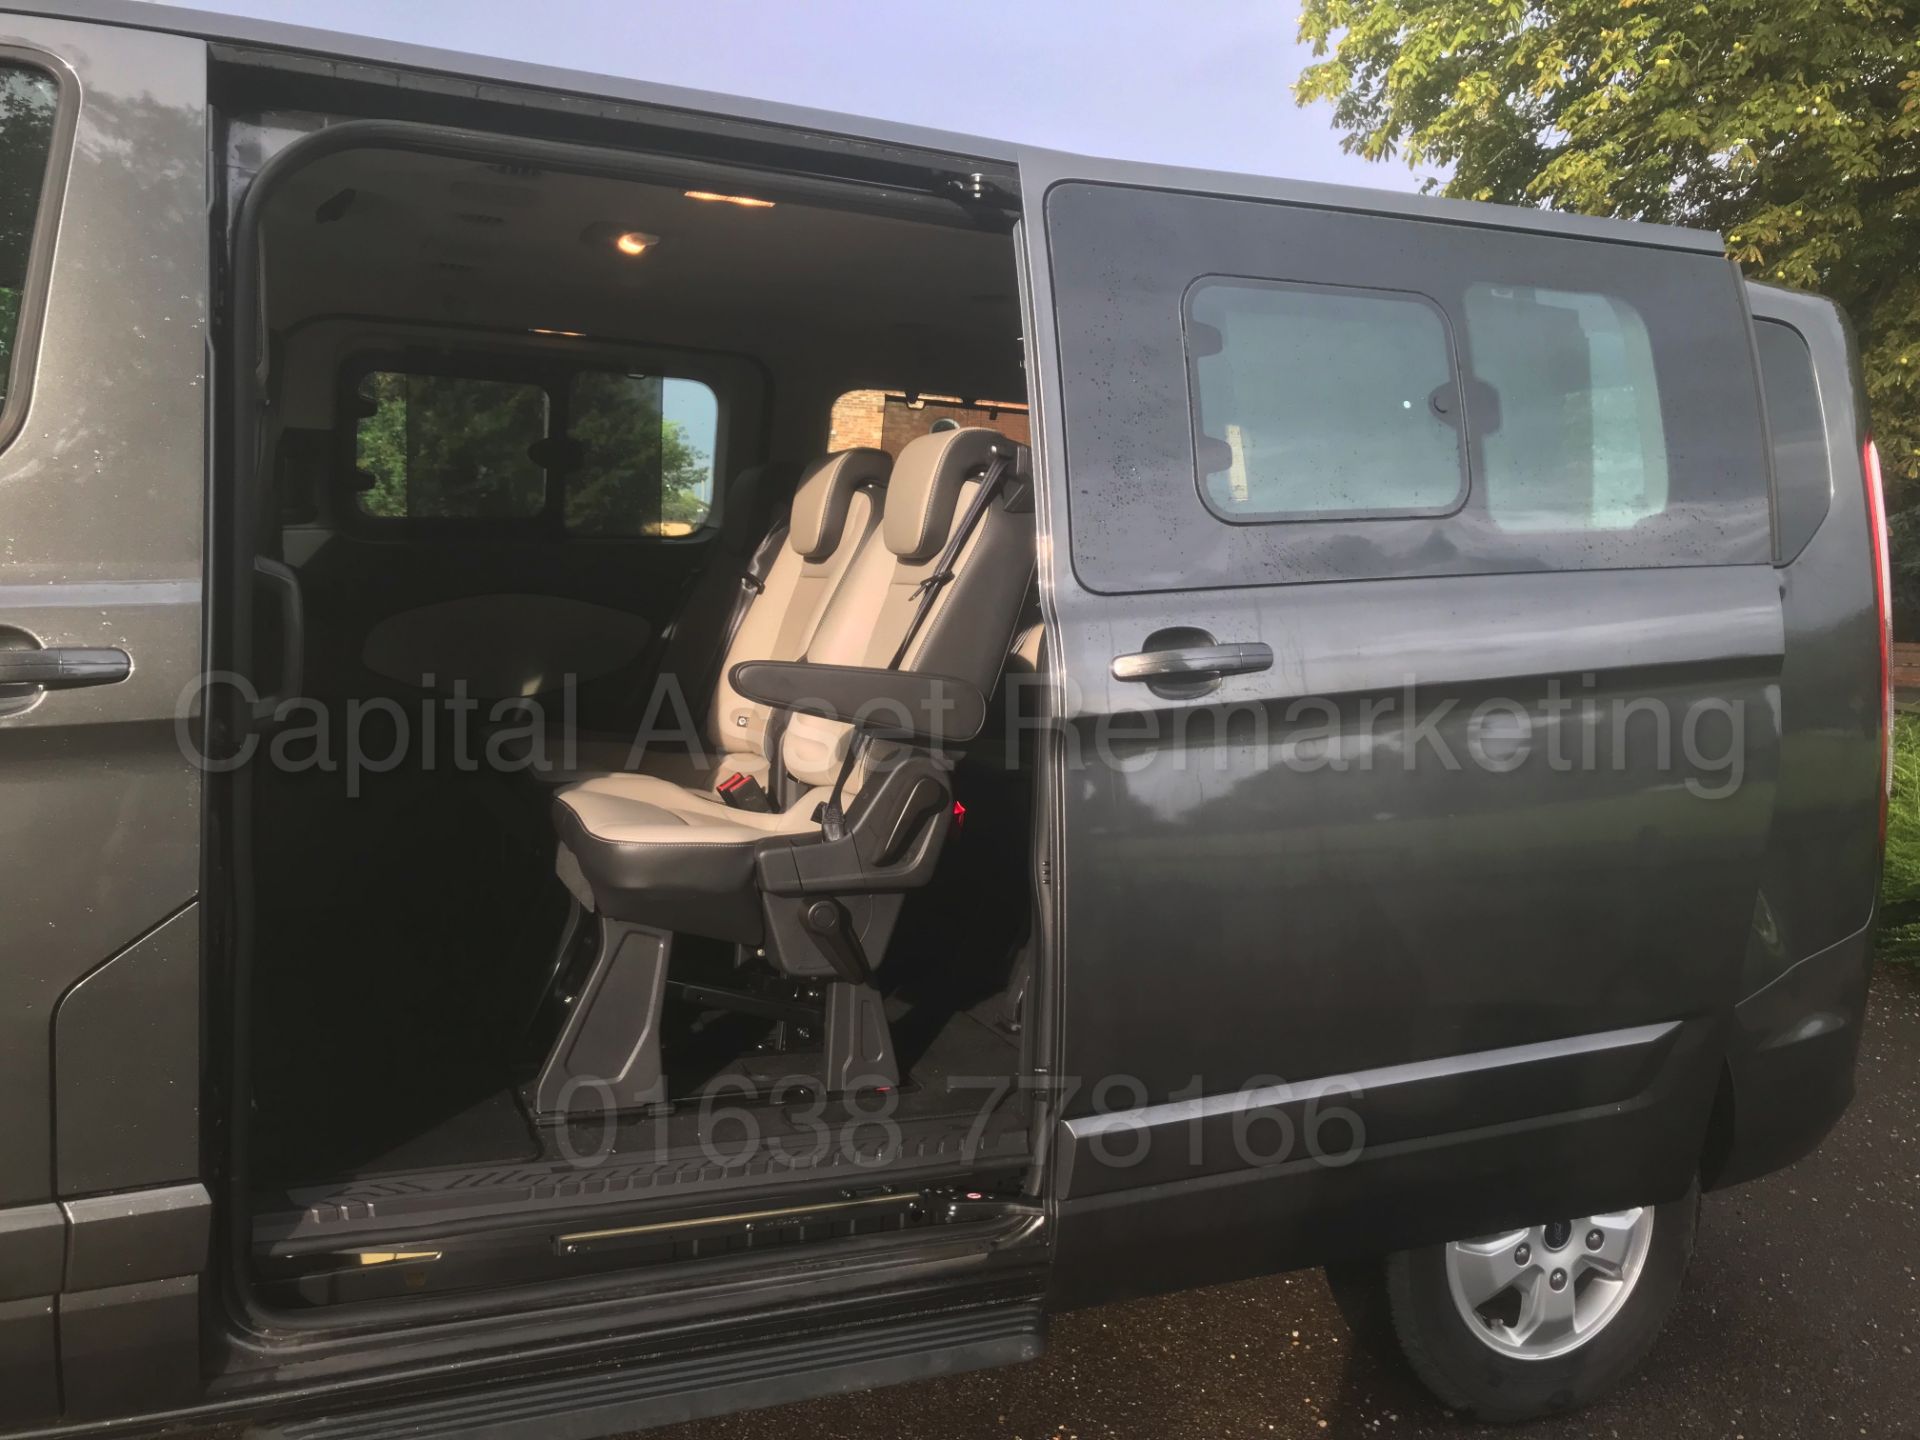 FORD TRANSIT 'TOURNEO' *TITANIUM EDITION* (2018) *9 SEATER MPV* '2.0 TDCI - 6 SPEED' *LOW MILES* - Image 30 of 62